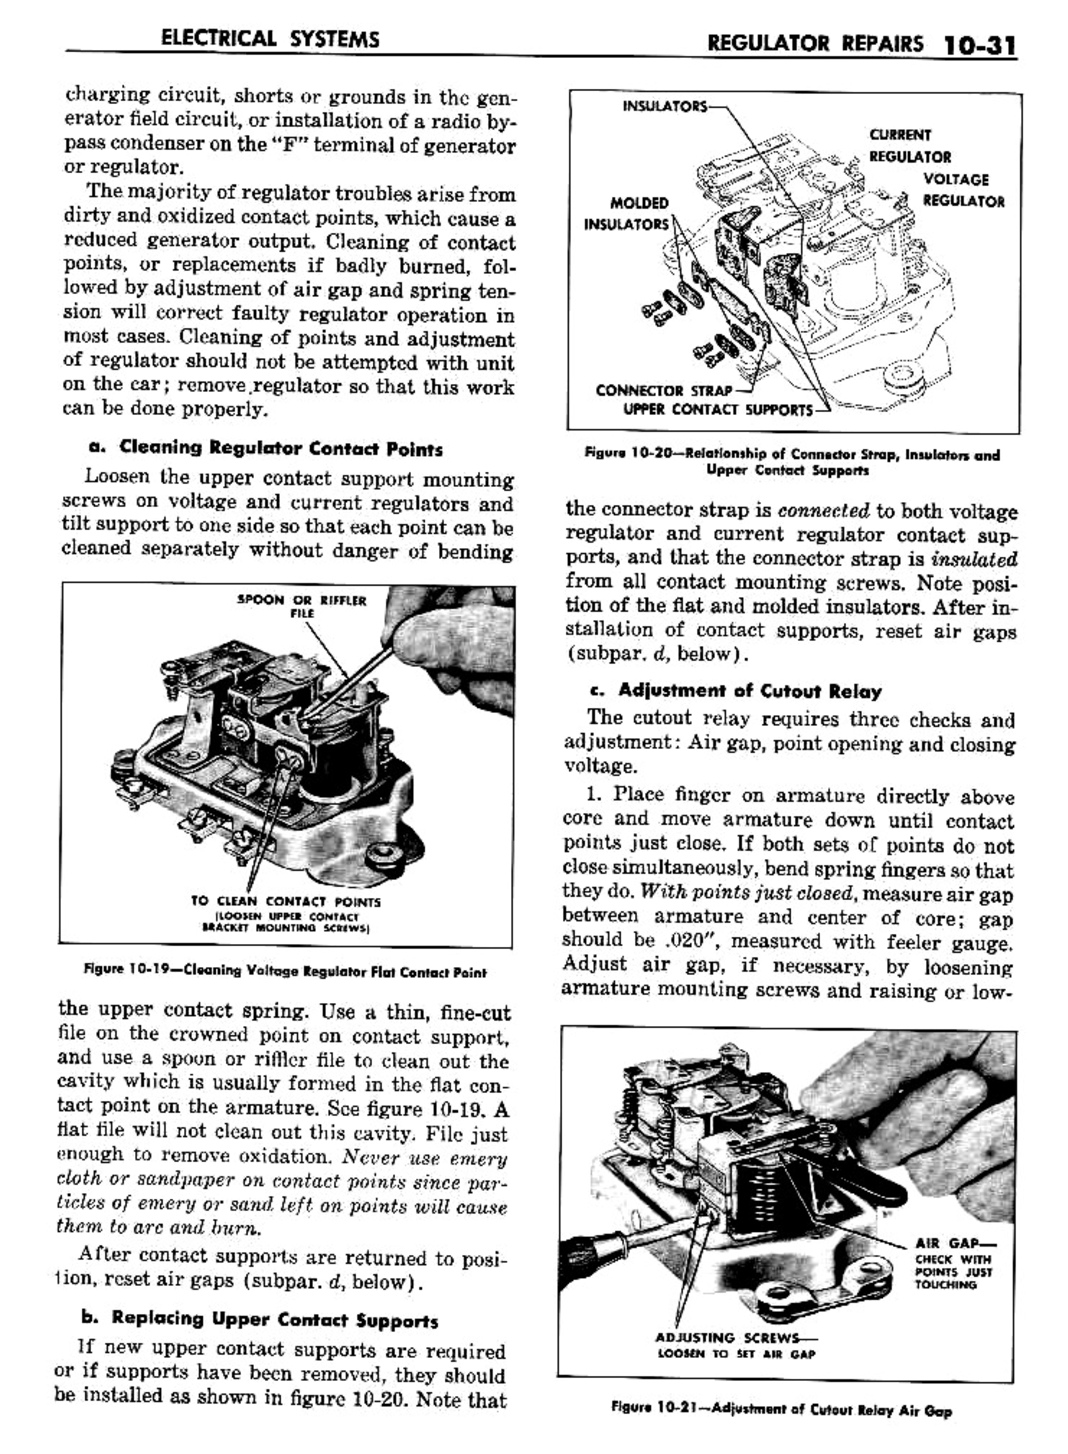 n_11 1957 Buick Shop Manual - Electrical Systems-031-031.jpg